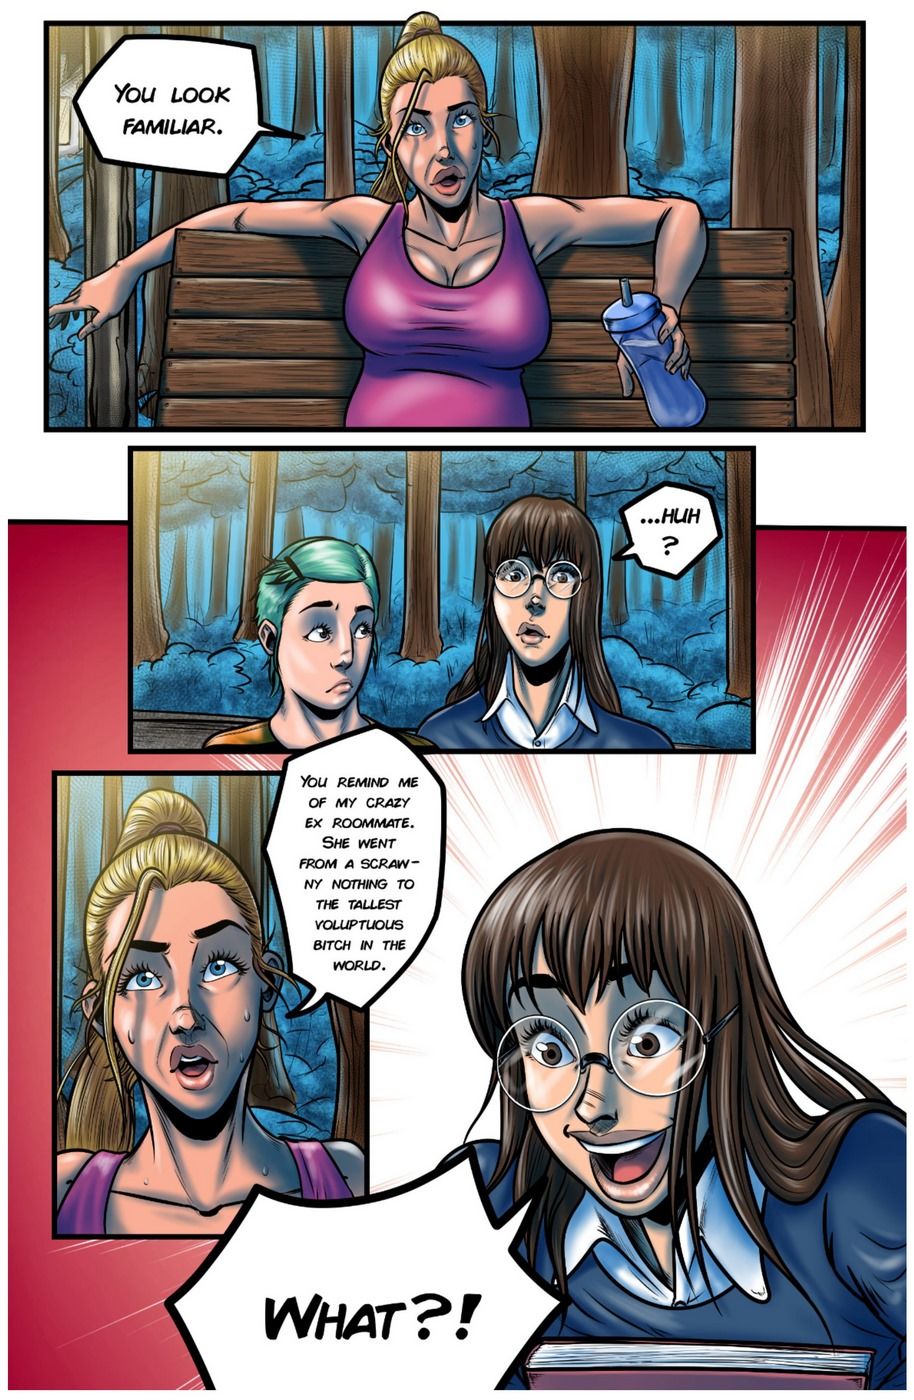 Zero to Z - Cup 2 Issue 2 page 12